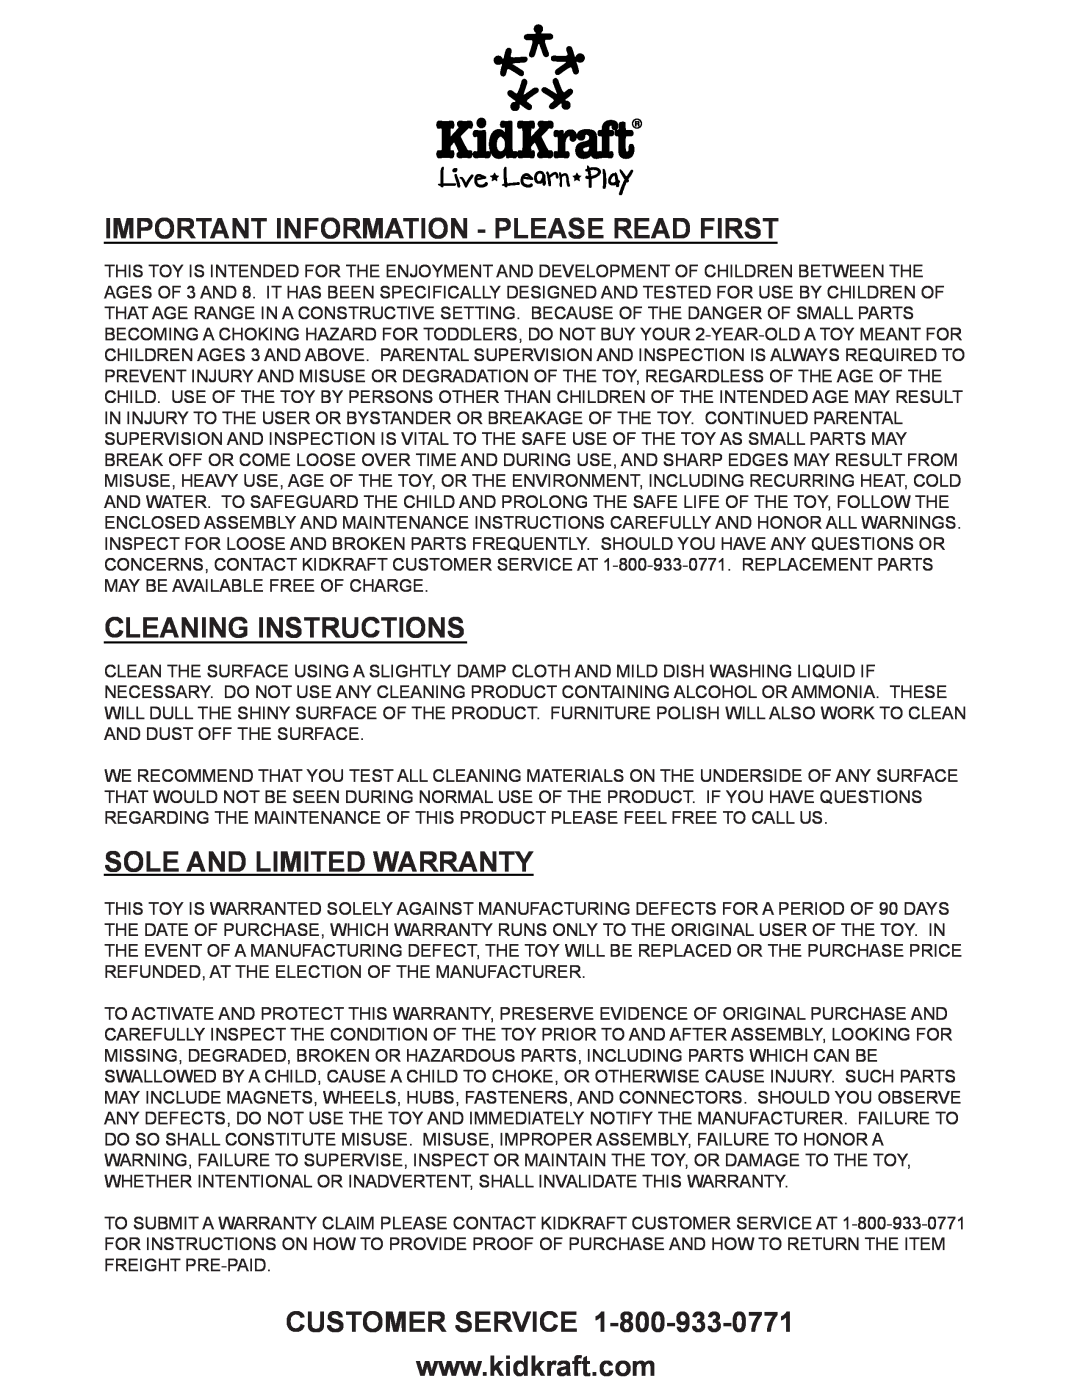 KidKraft 17429 manual Important Information - Please Read First, Cleaning Instructions, Sole And Limited Warranty 